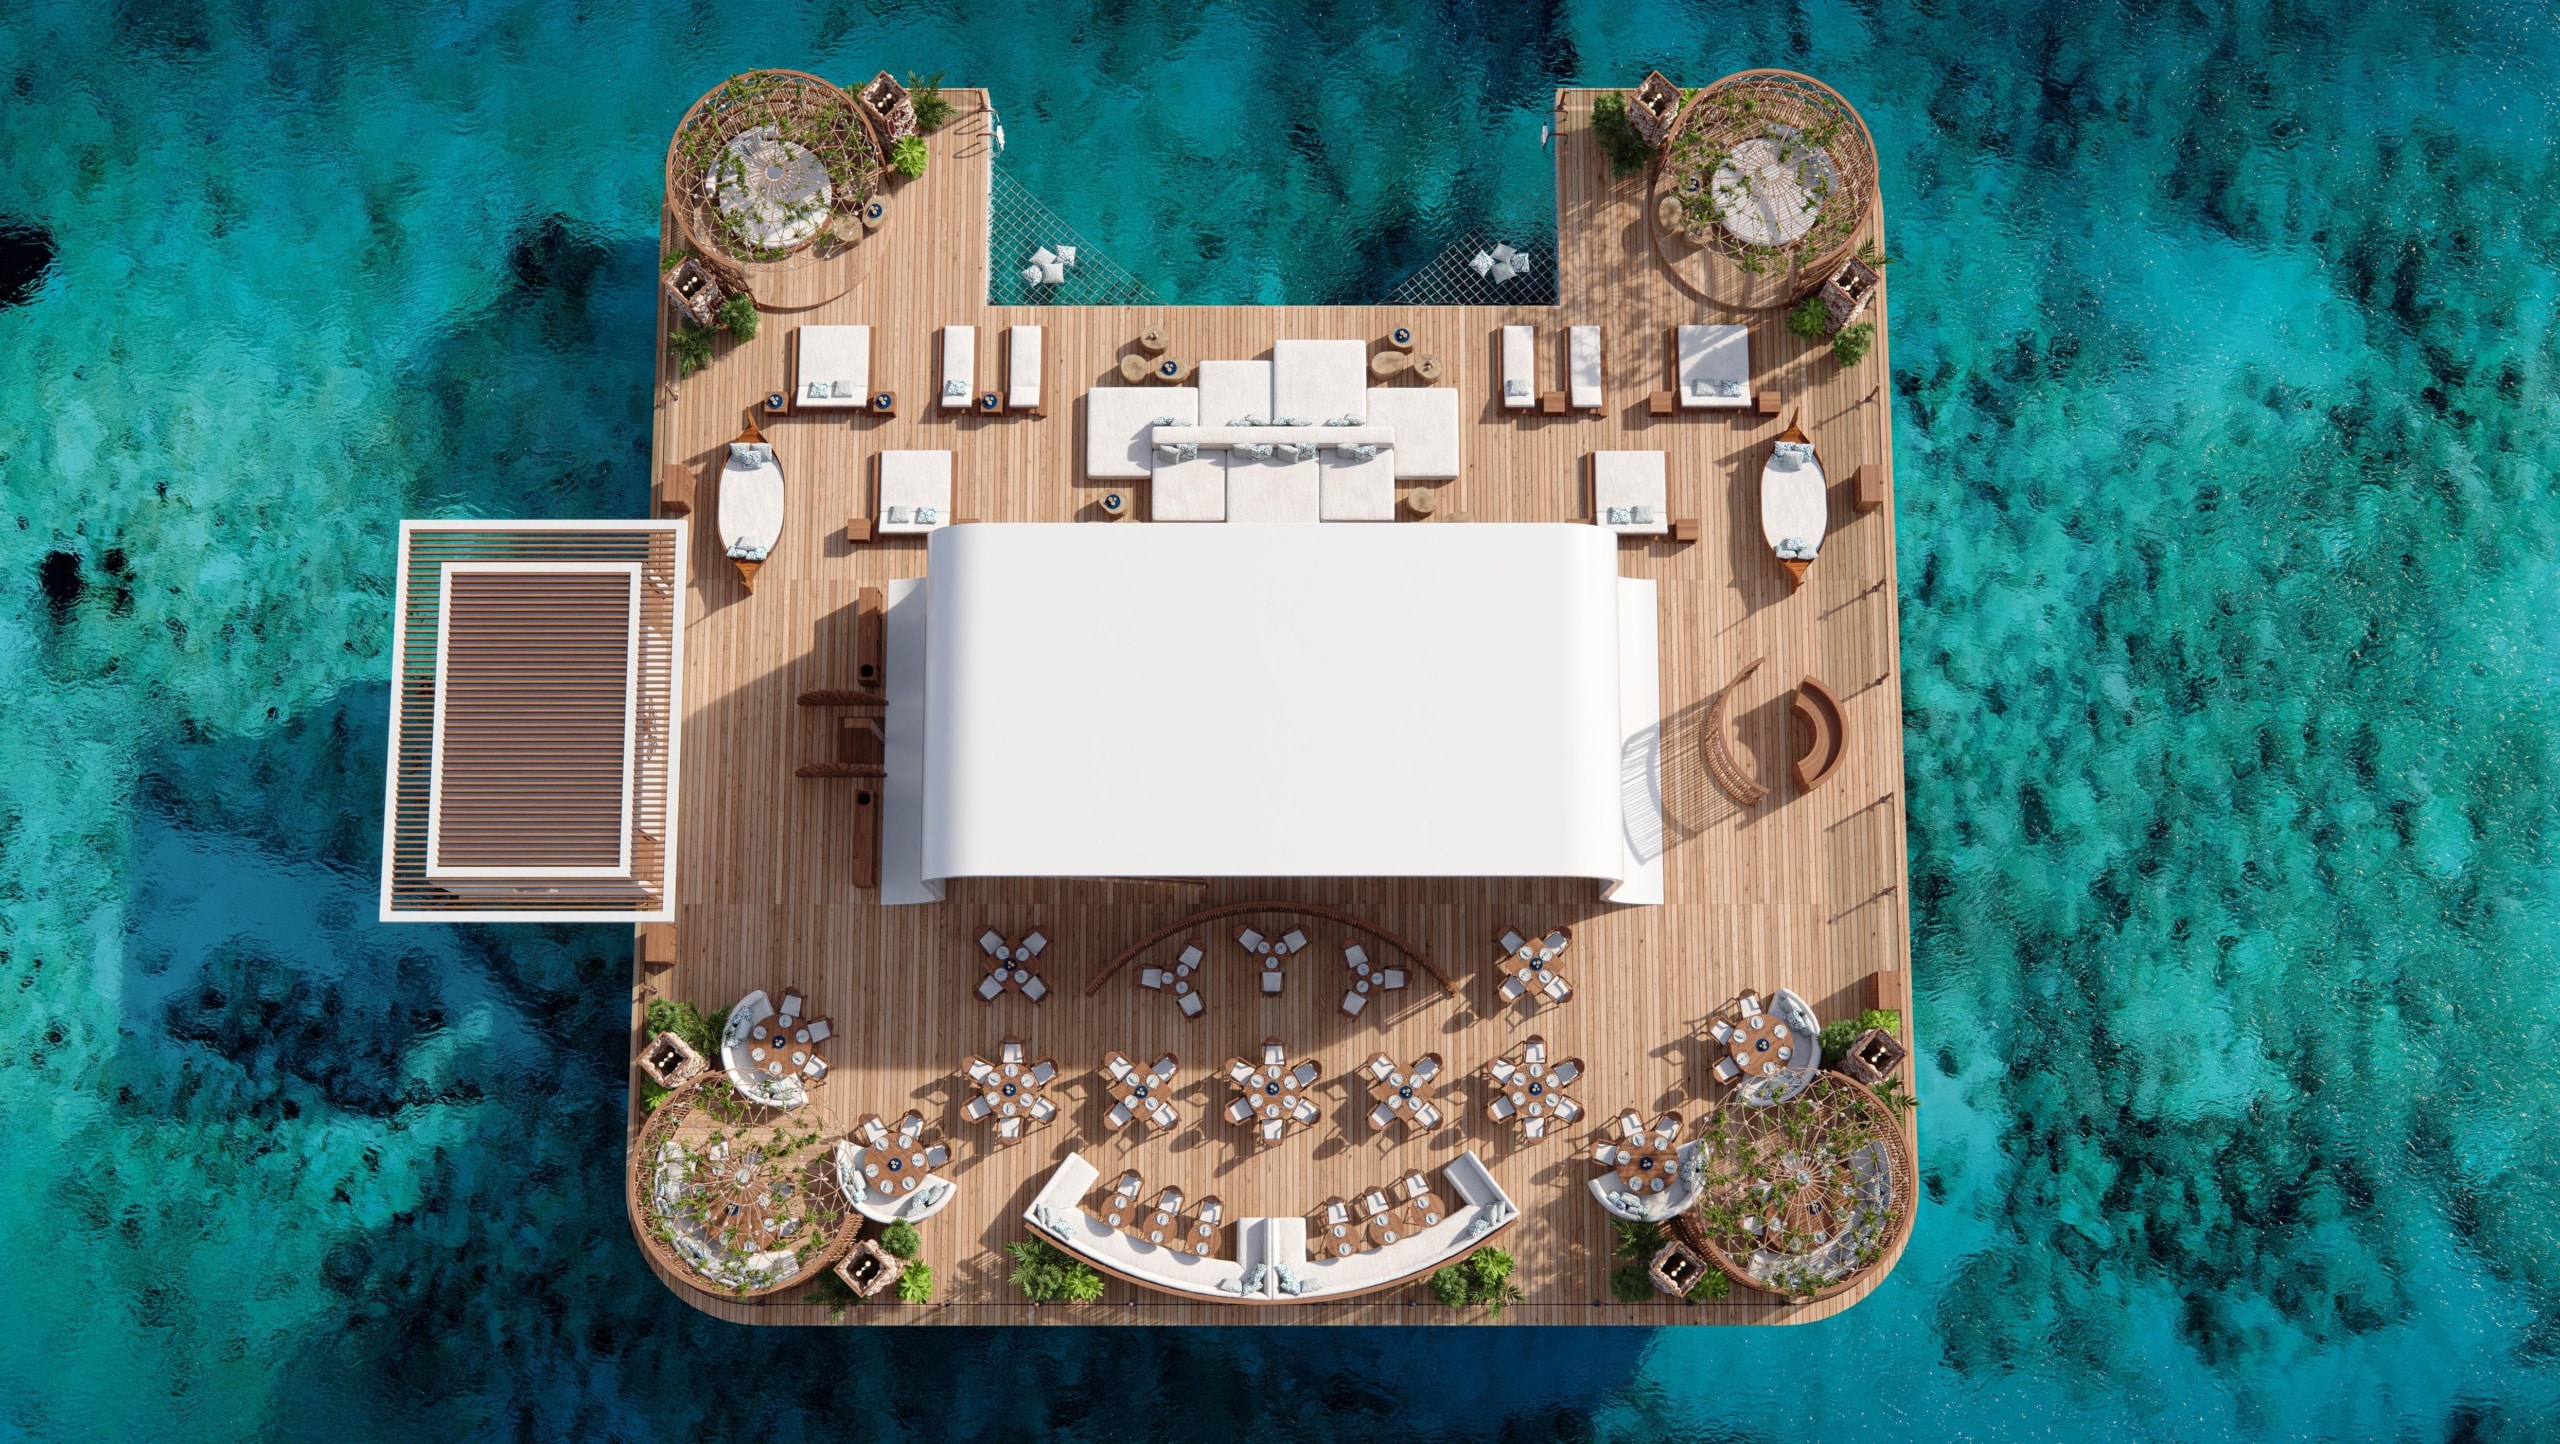 Oceaya view Ibiza. Meyer floating solutions. Floating stage